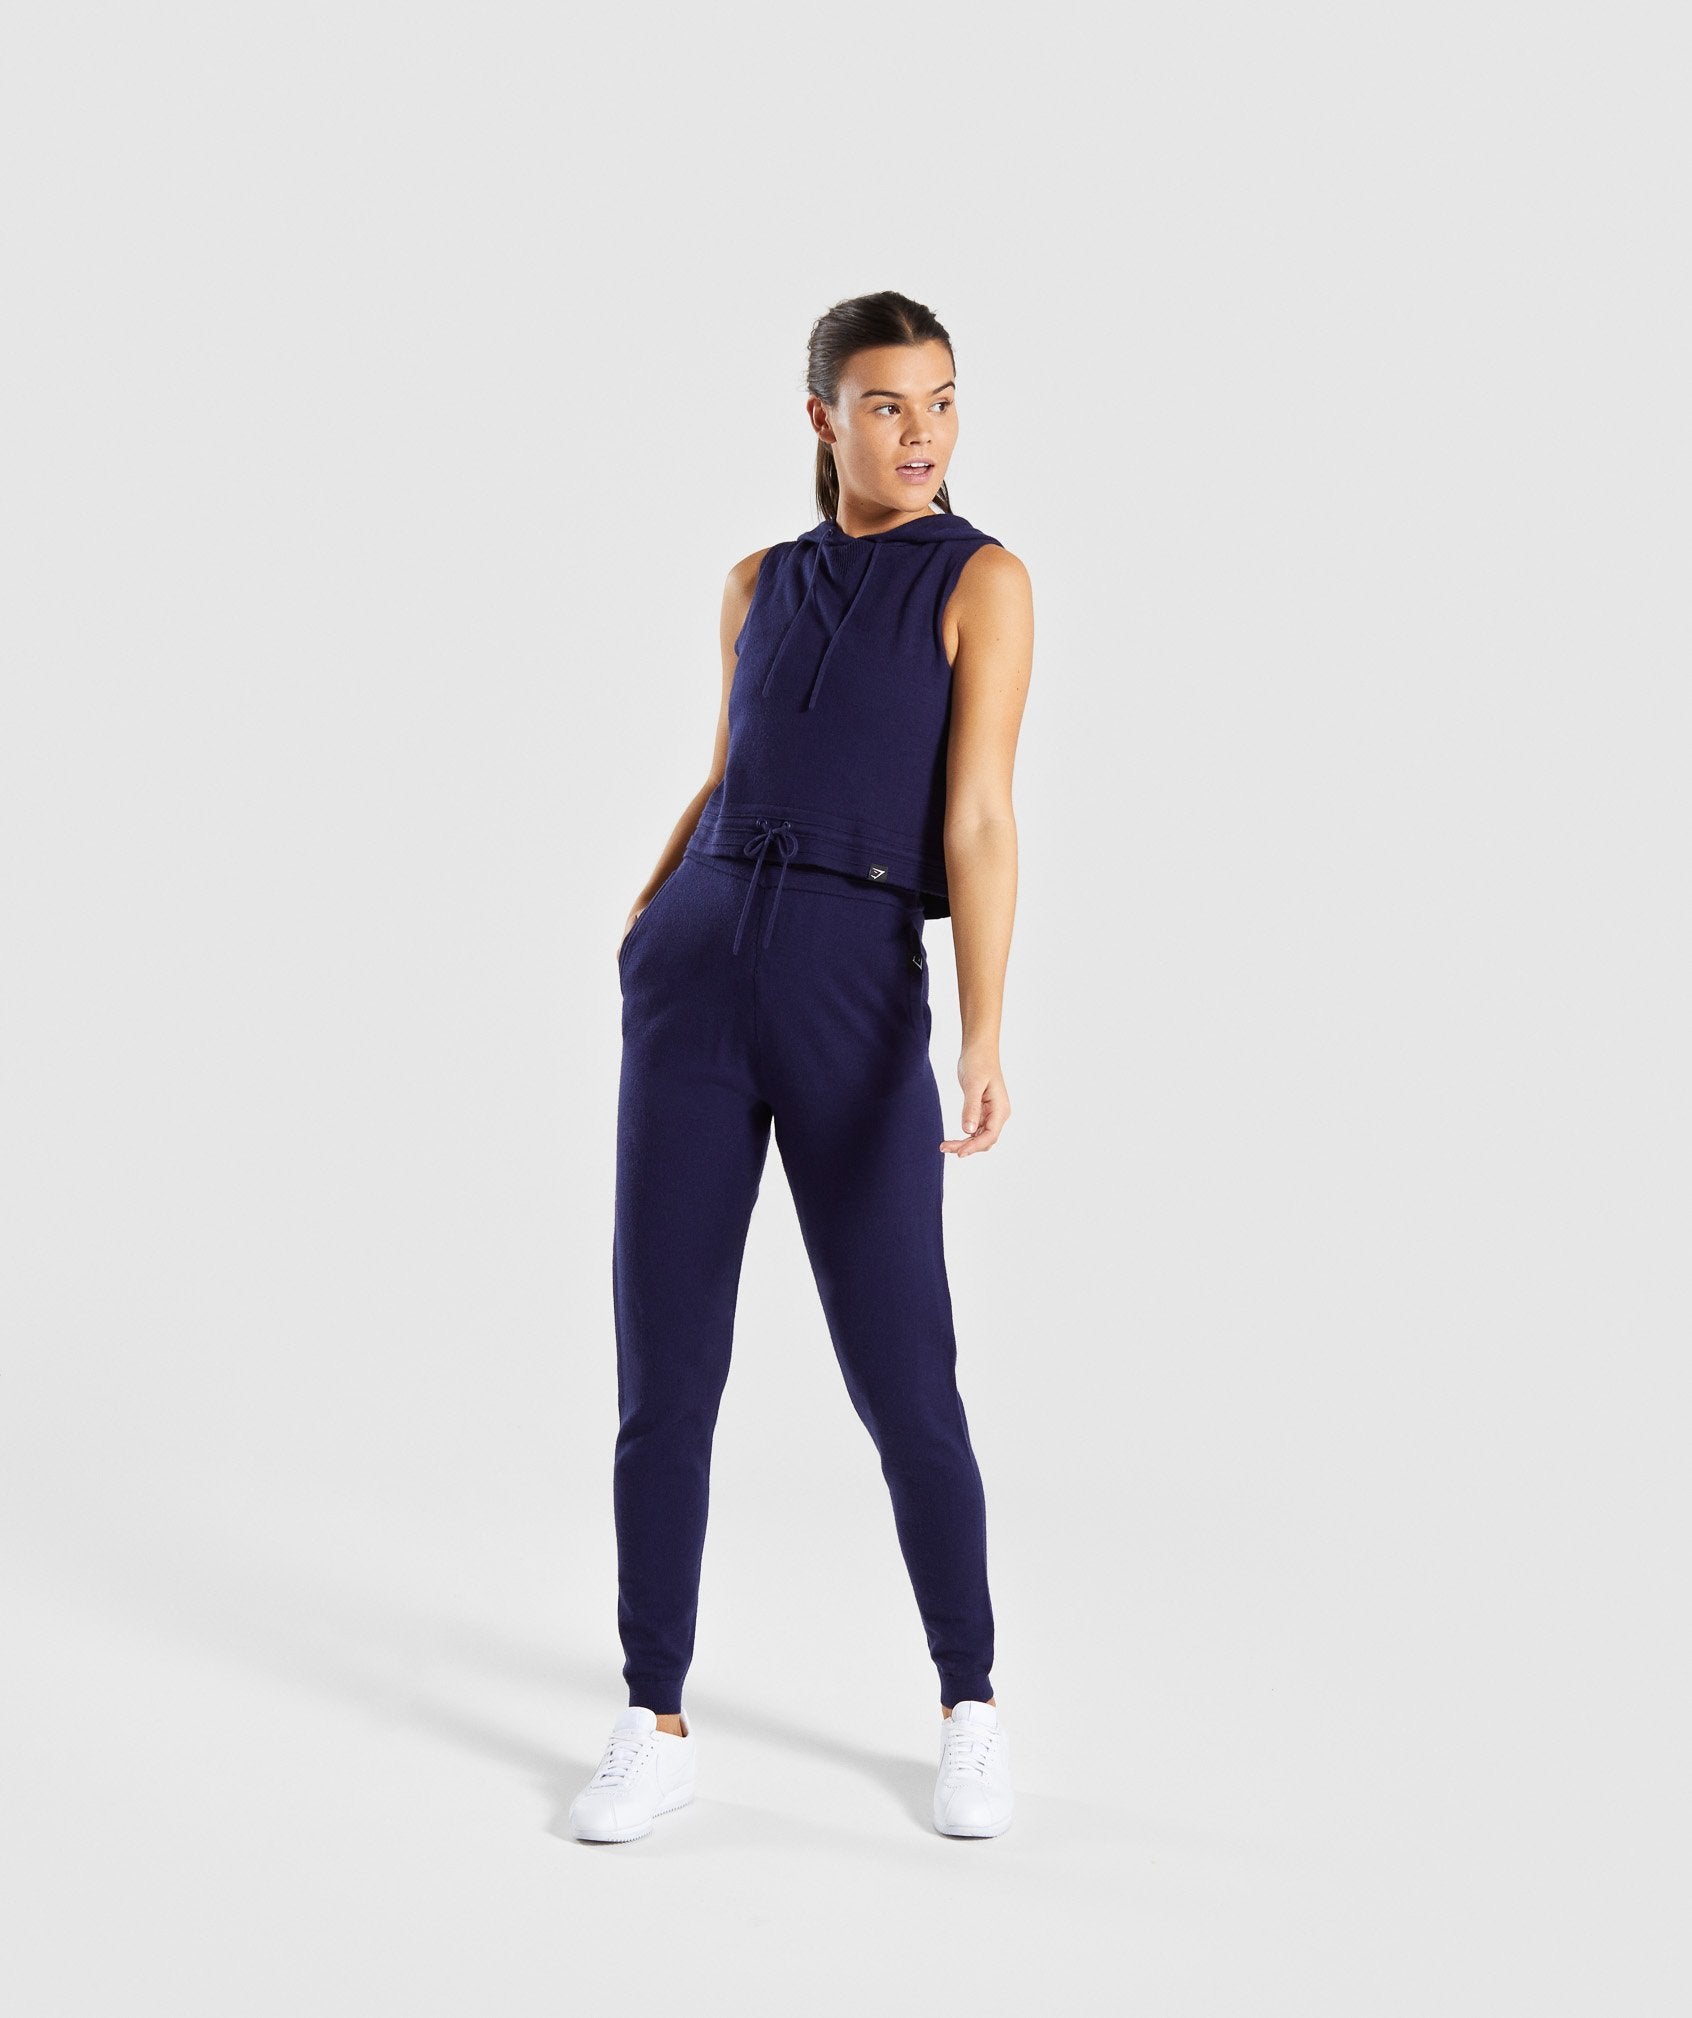 Isla Knit Jogger in Evening Navy Blue - view 4